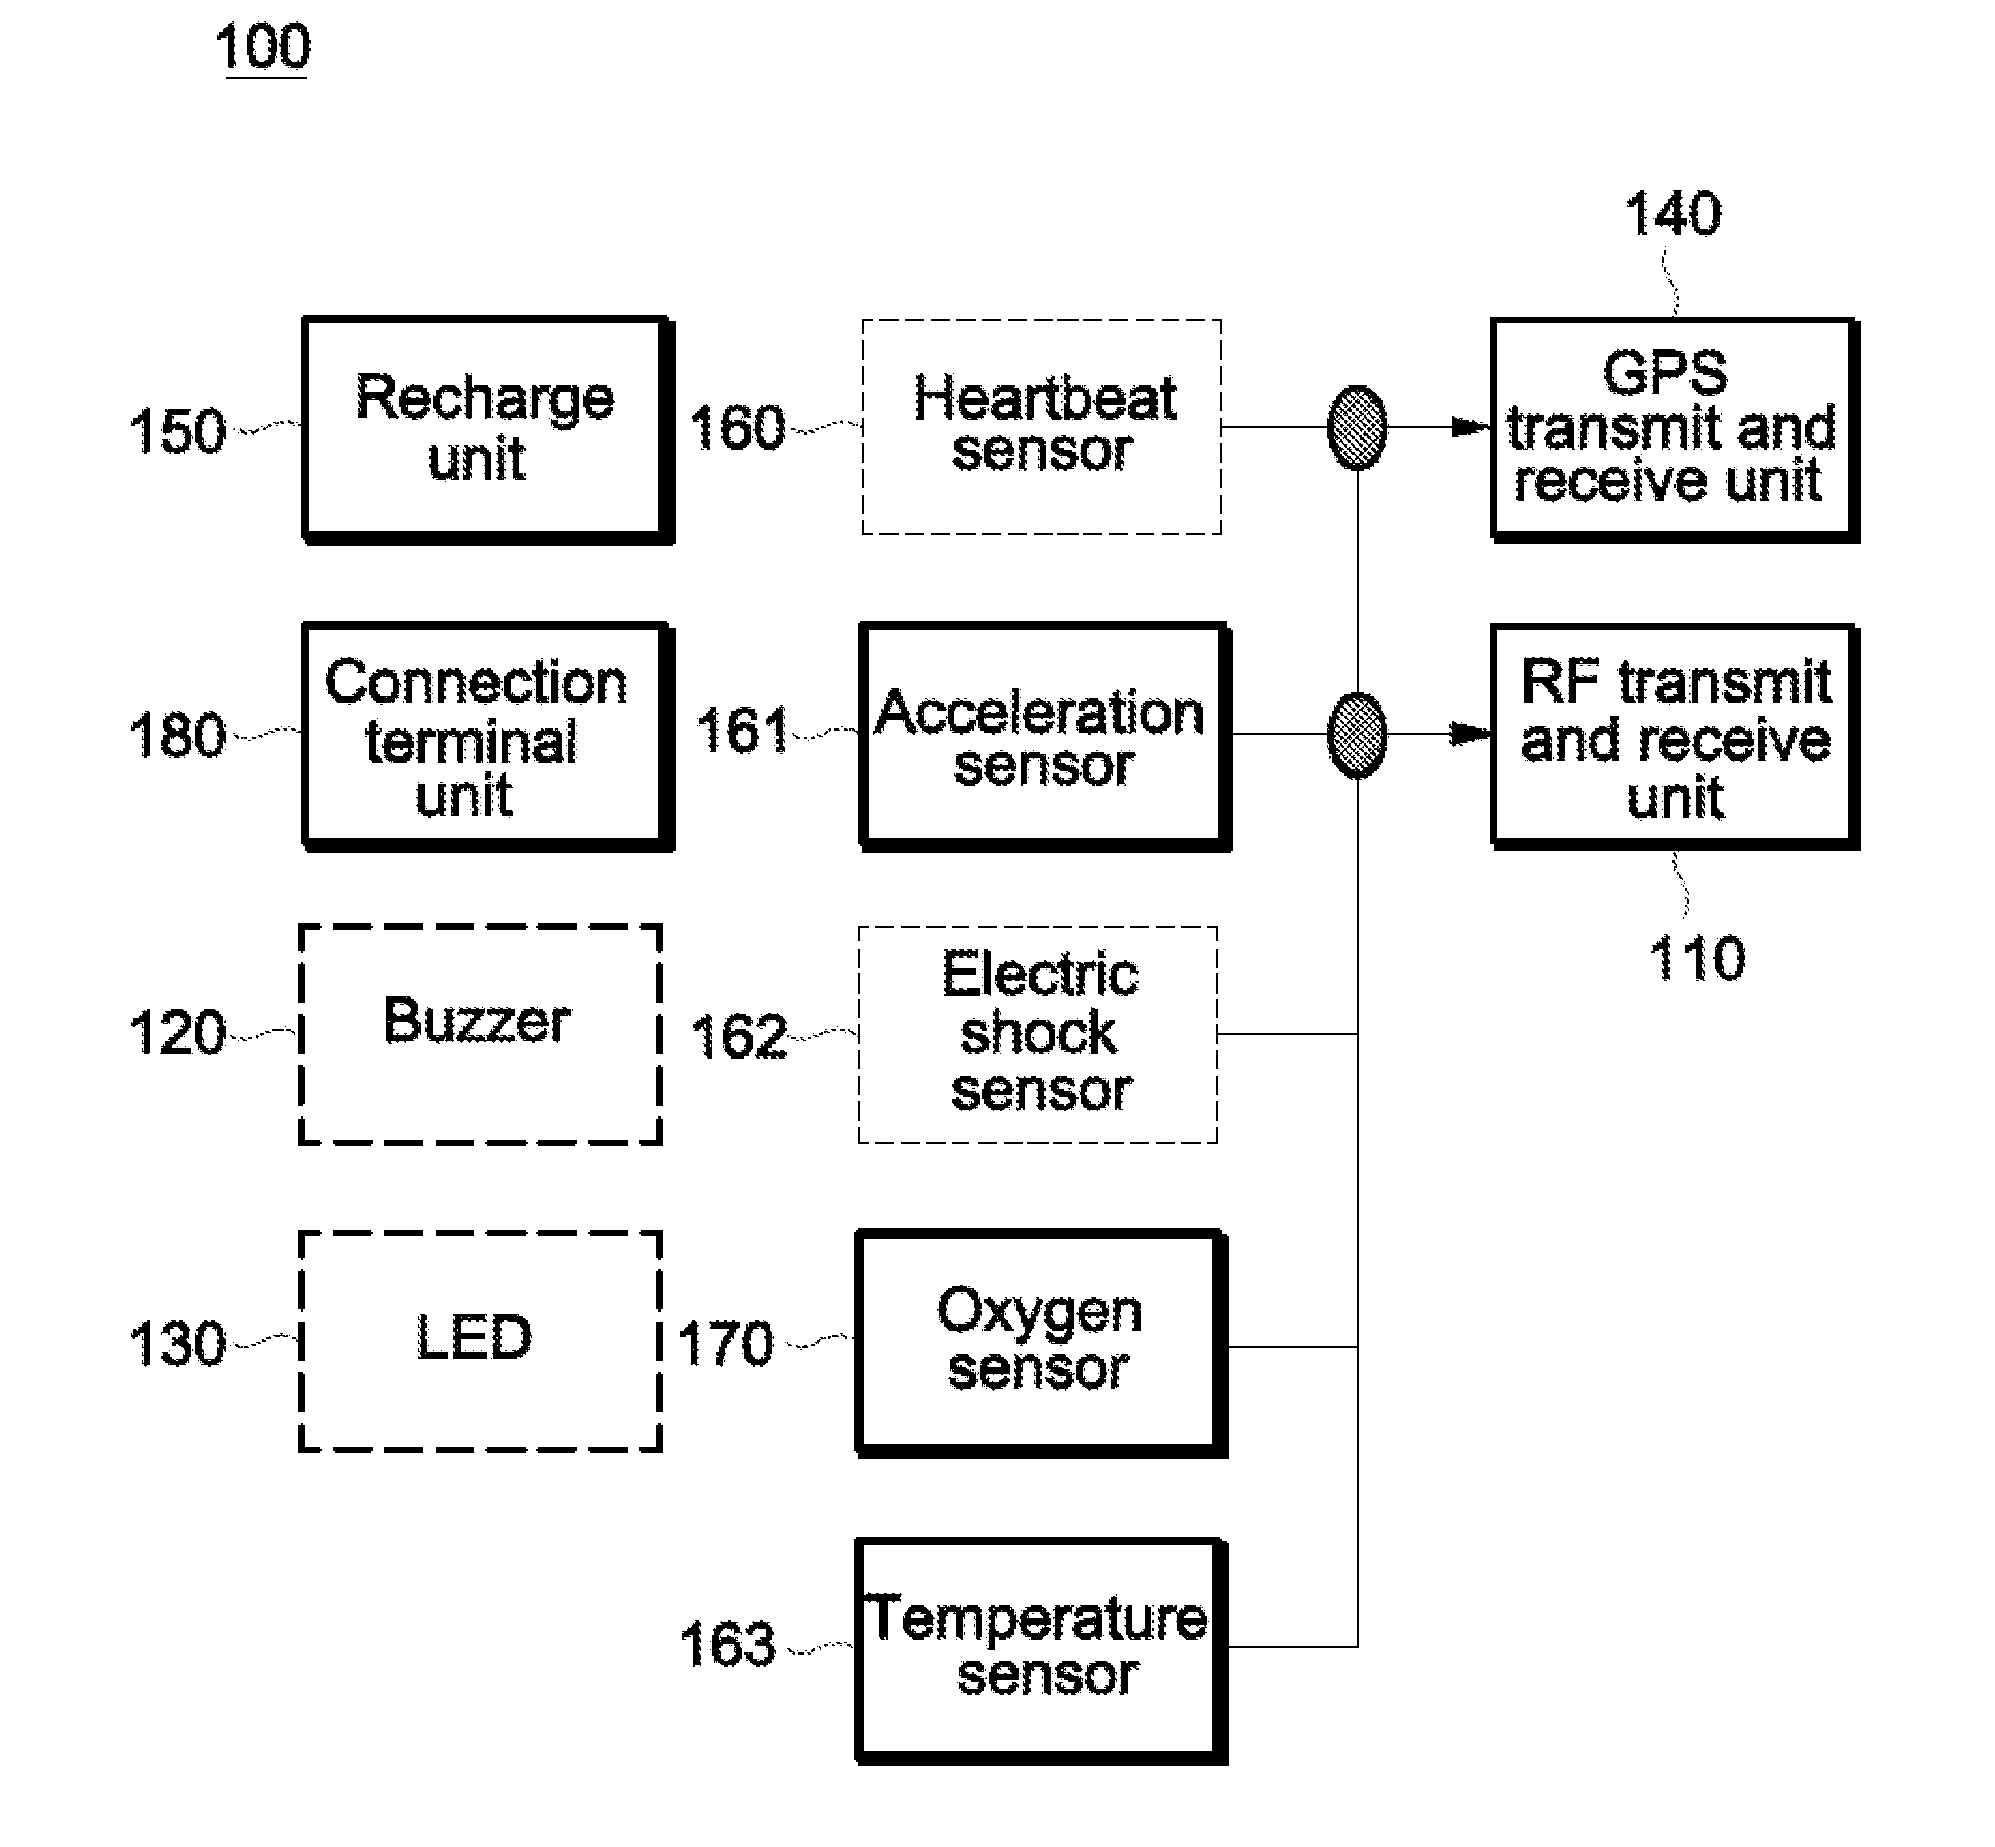 Real-time alarm system for field safety management and driving method thereof